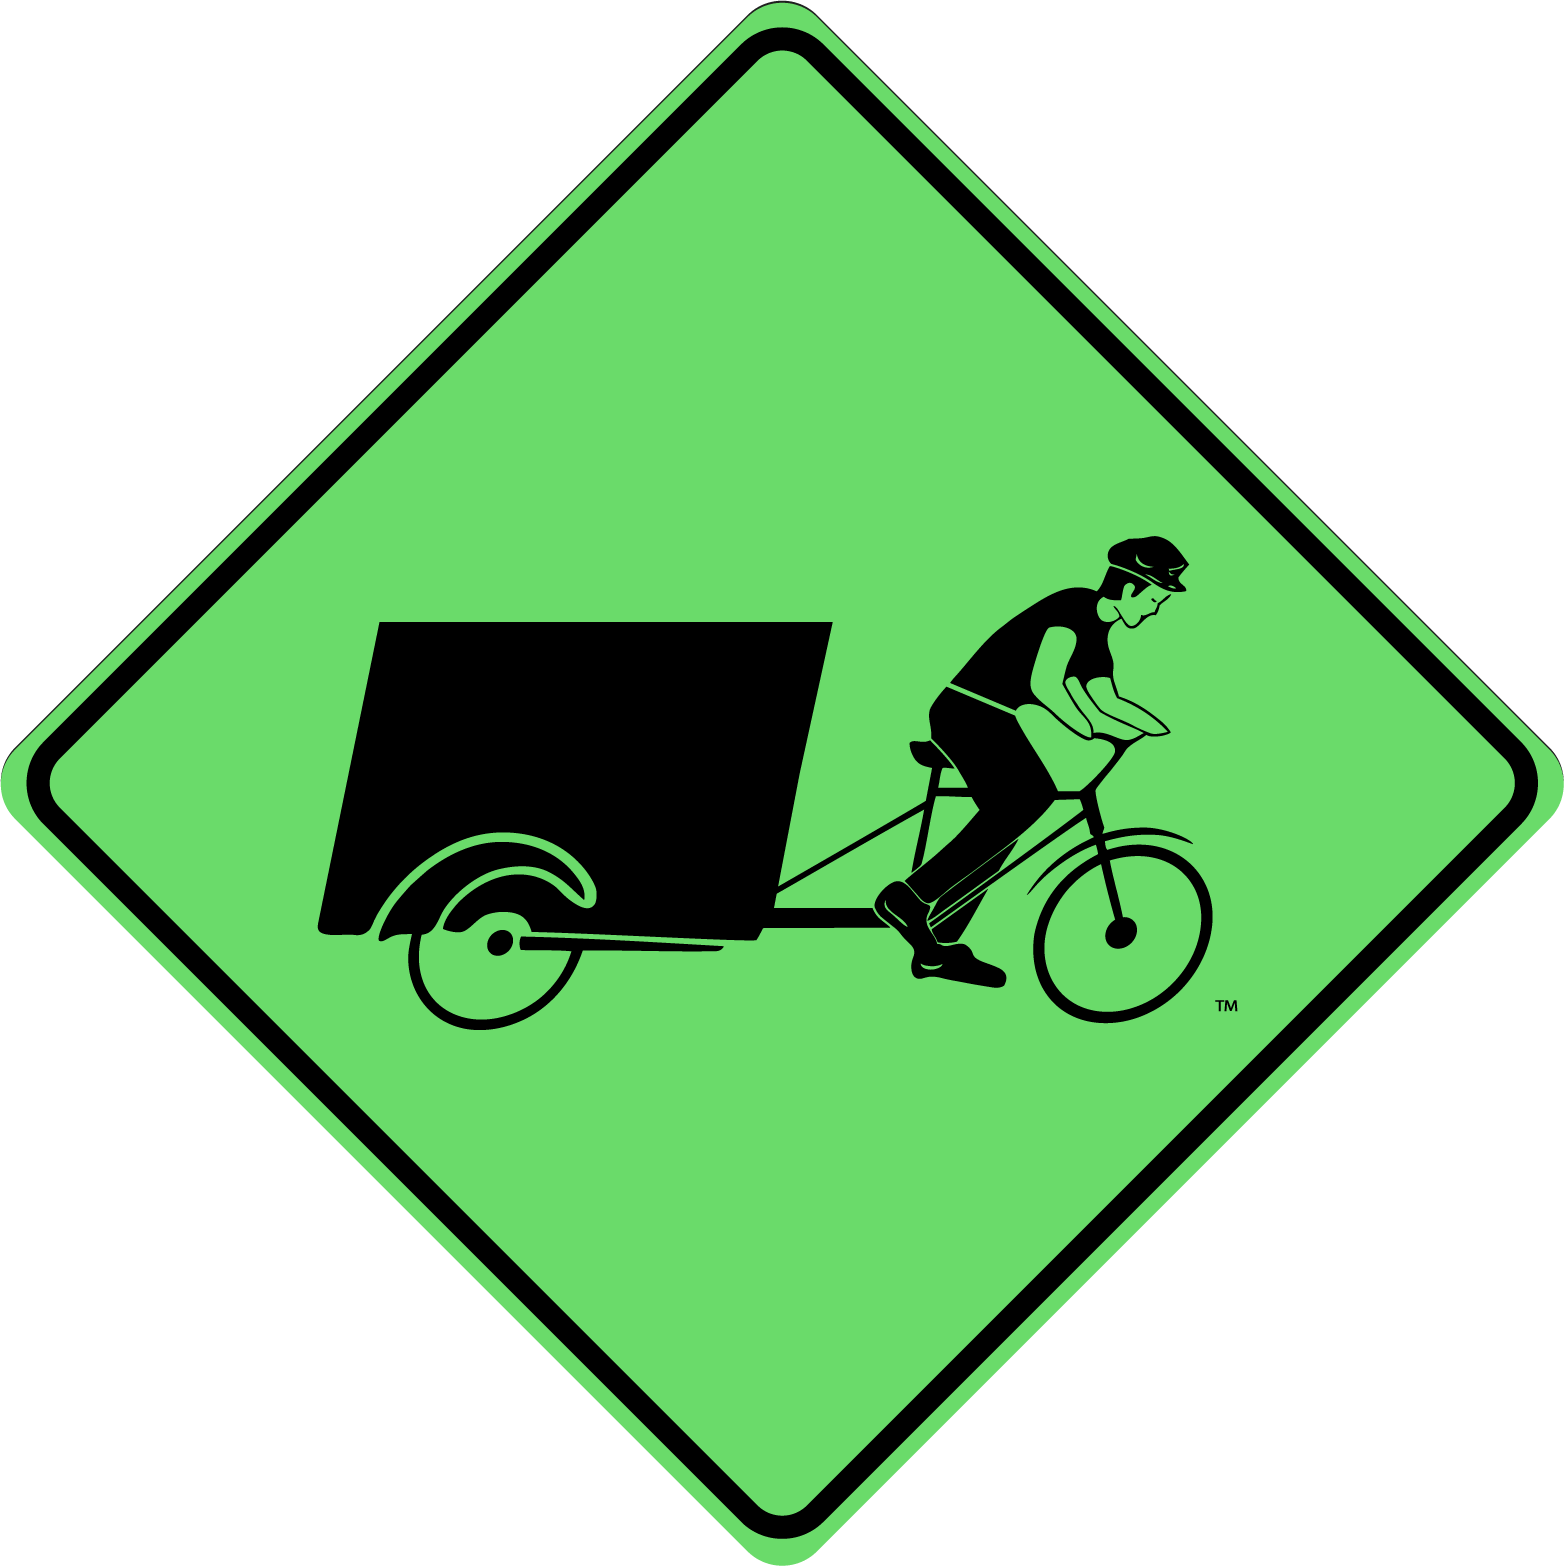 link to Pedal Truck website